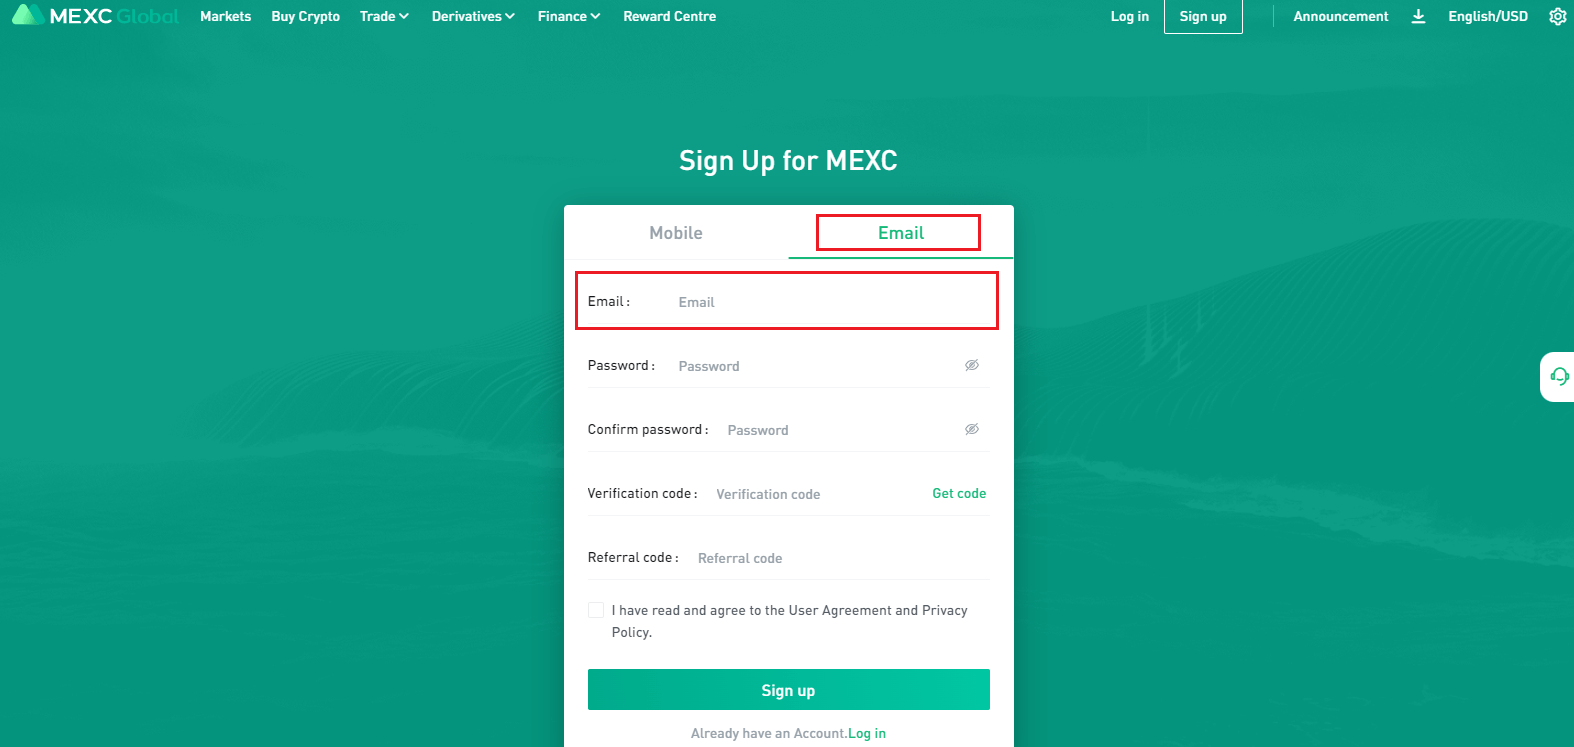 How to Open a Trading Account in MEXC